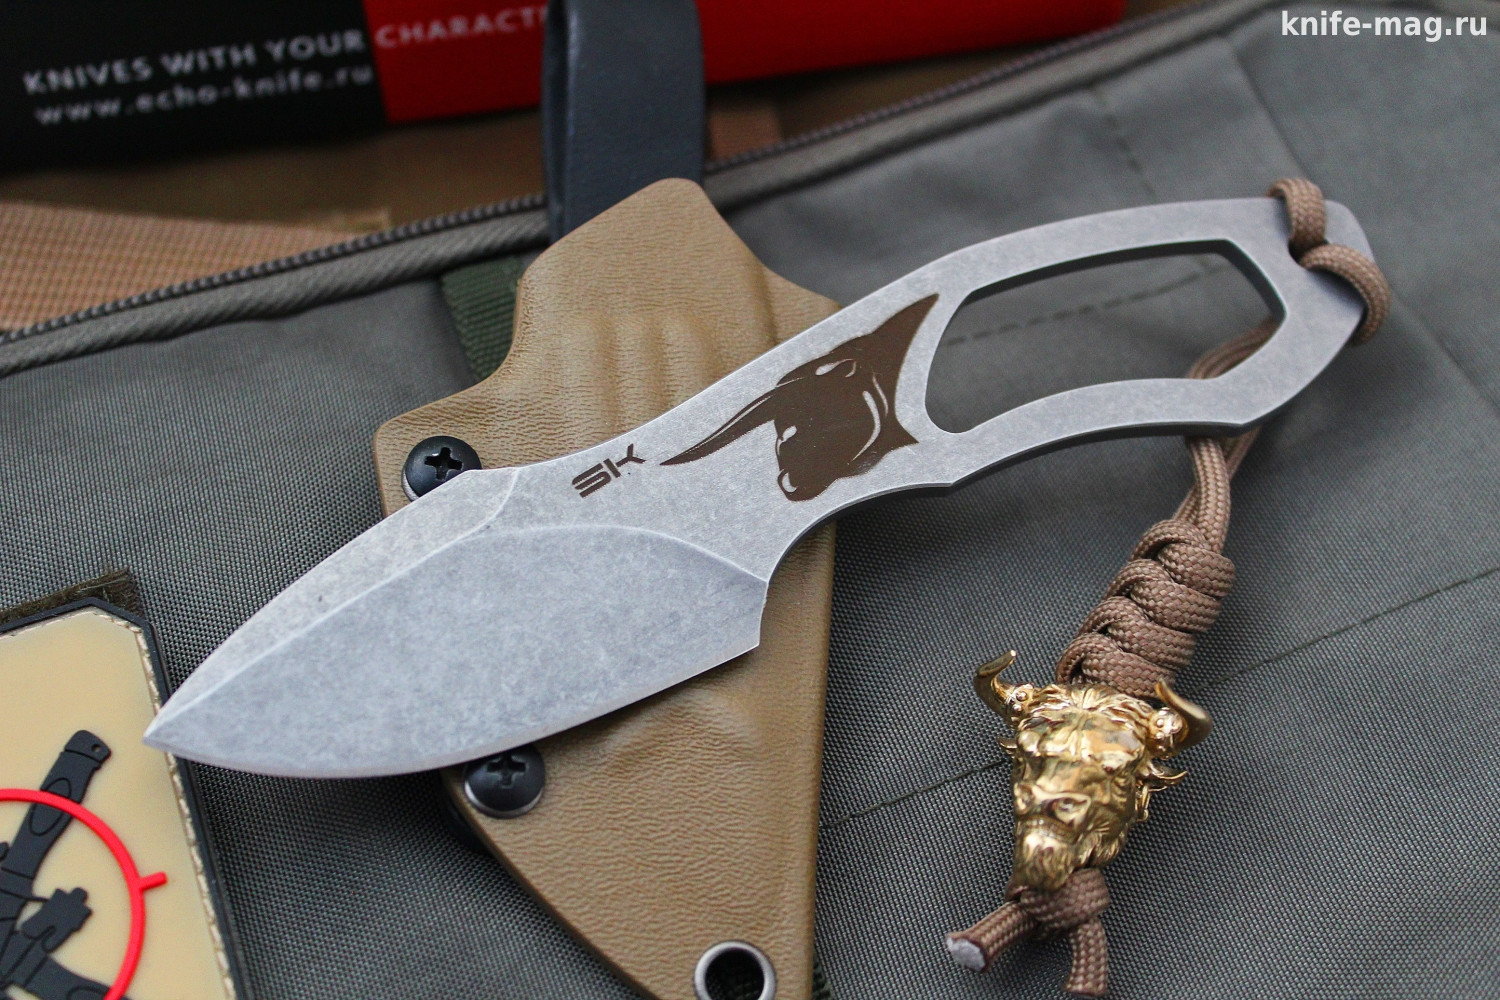 Нож "bull" s/w aus-8 Special Knives. Special Knives Rip Stonewash. Knife "Special Squad 809". Нож Rip Special Knives.